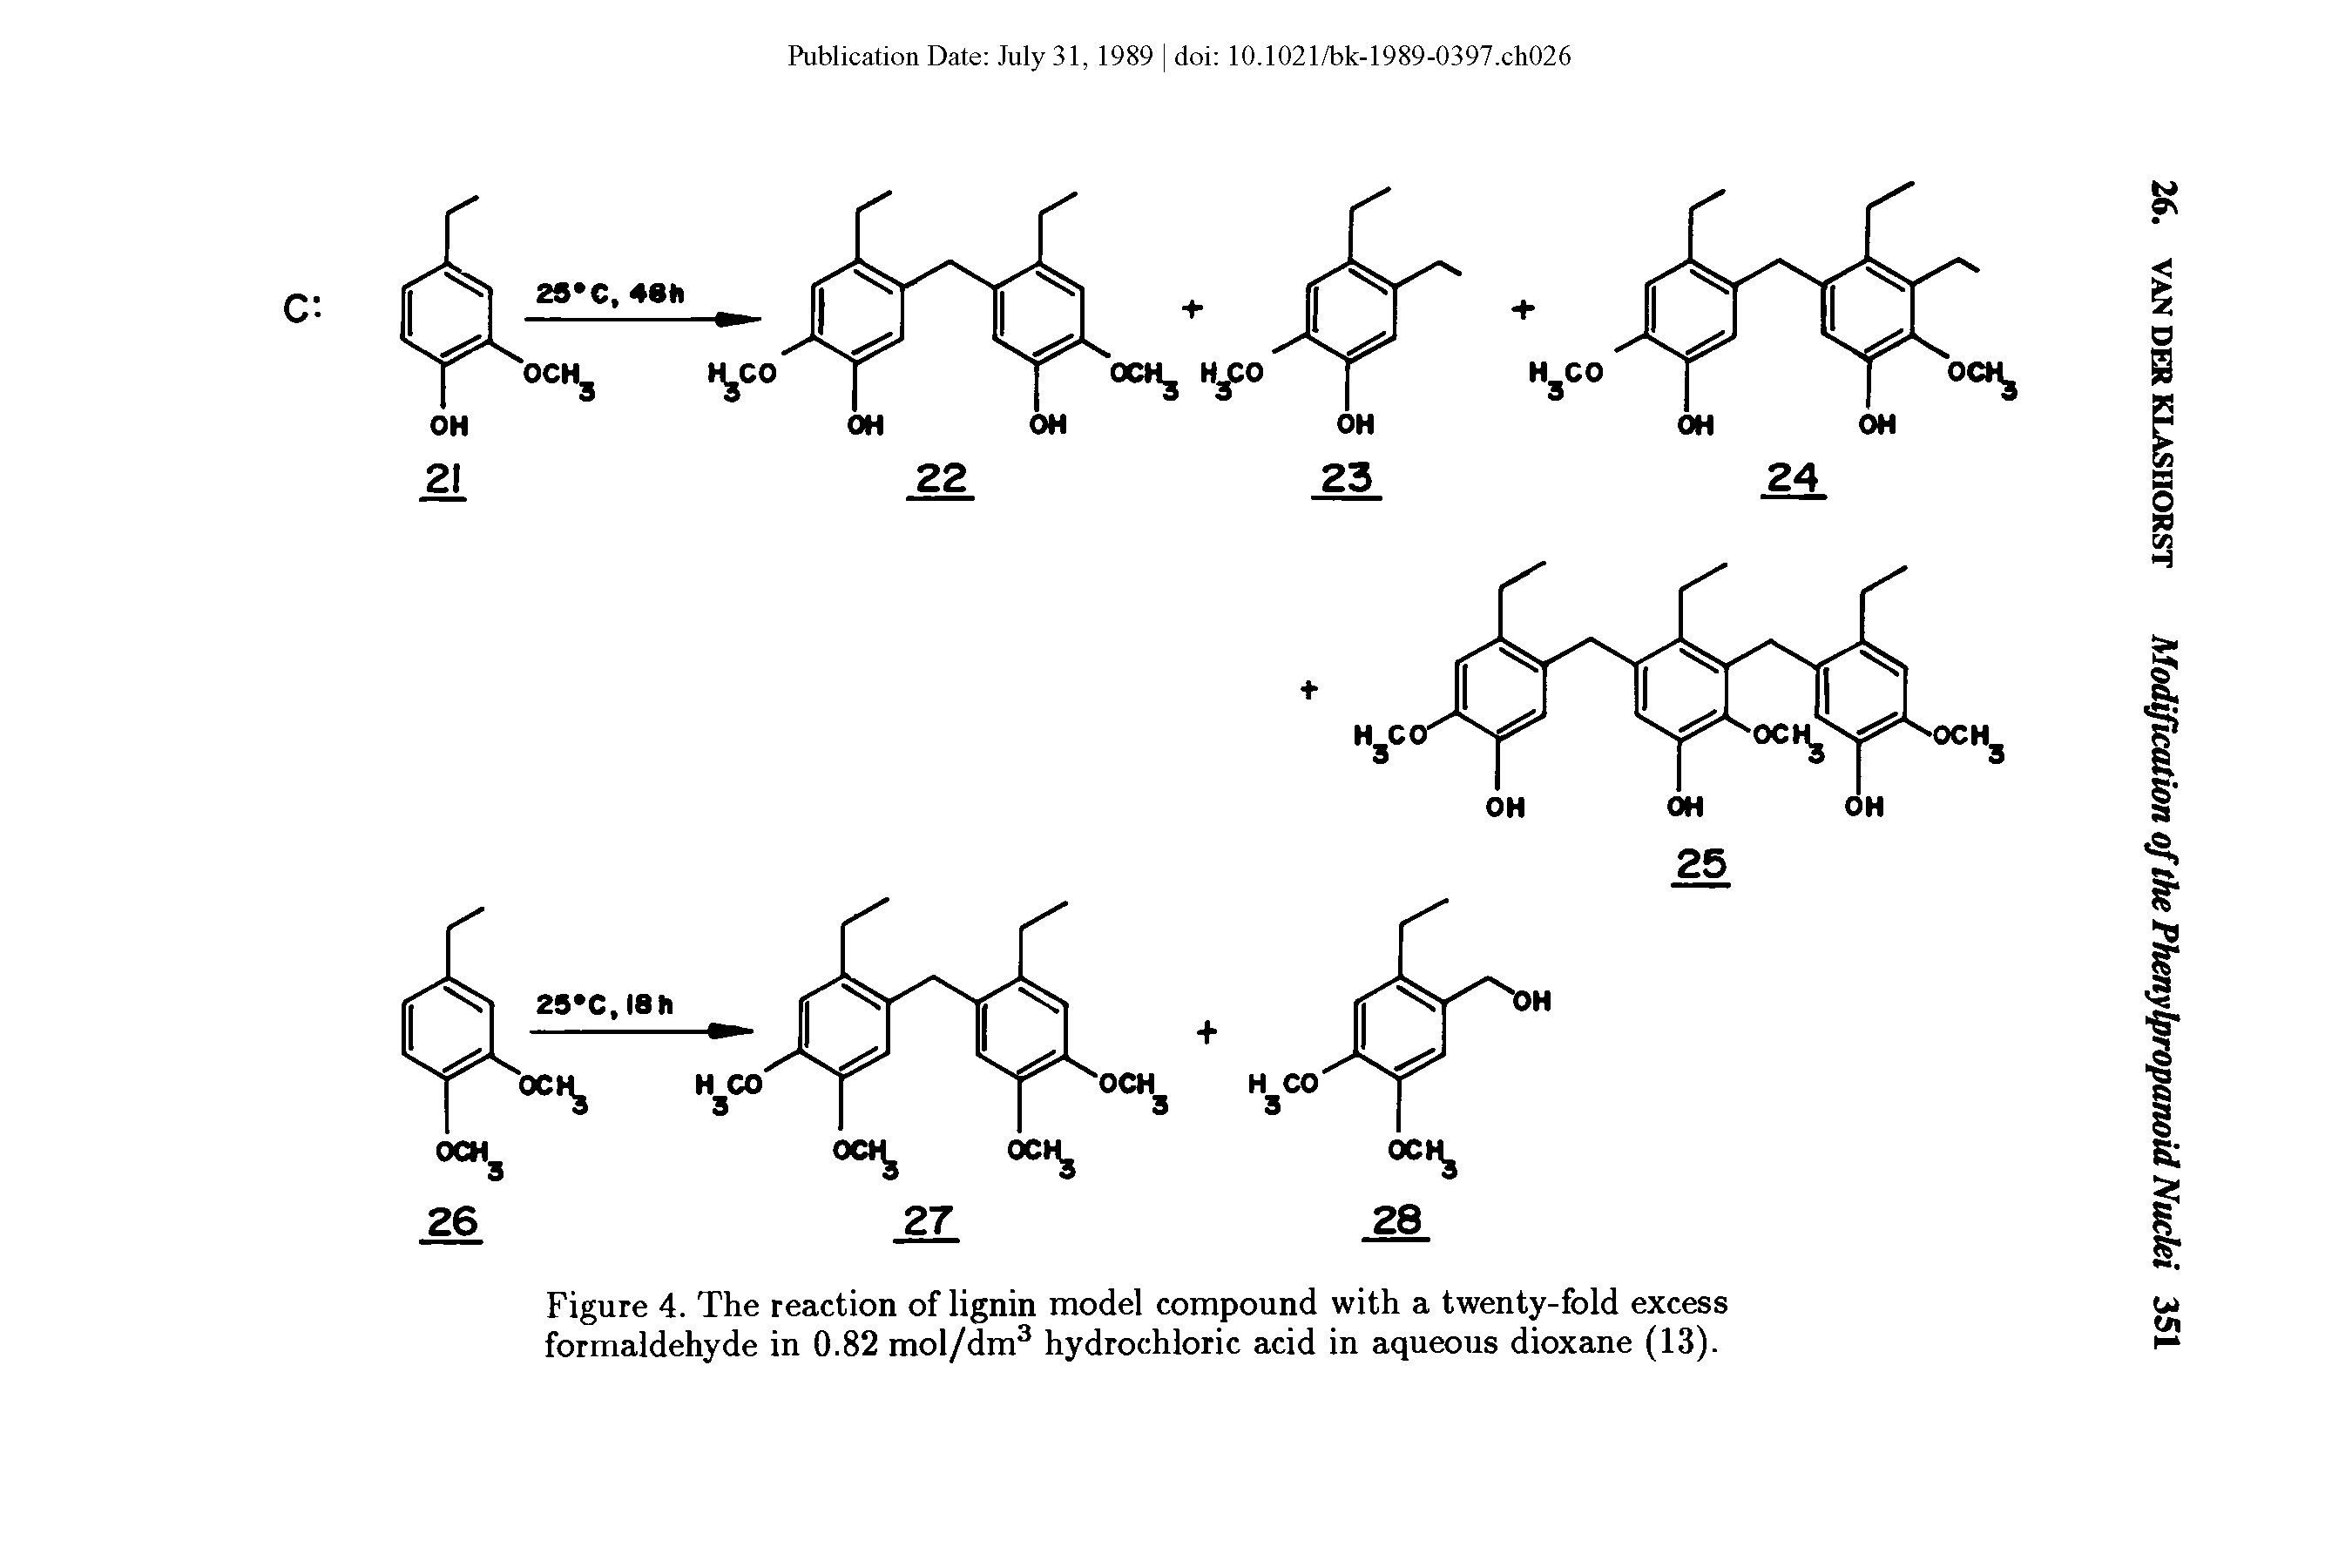 Figure 4. The reaction of lignin model compound with a twenty-fold excess formaldehyde in 0.82 mol/dm3 hydrochloric acid in aqueous dioxane (13).